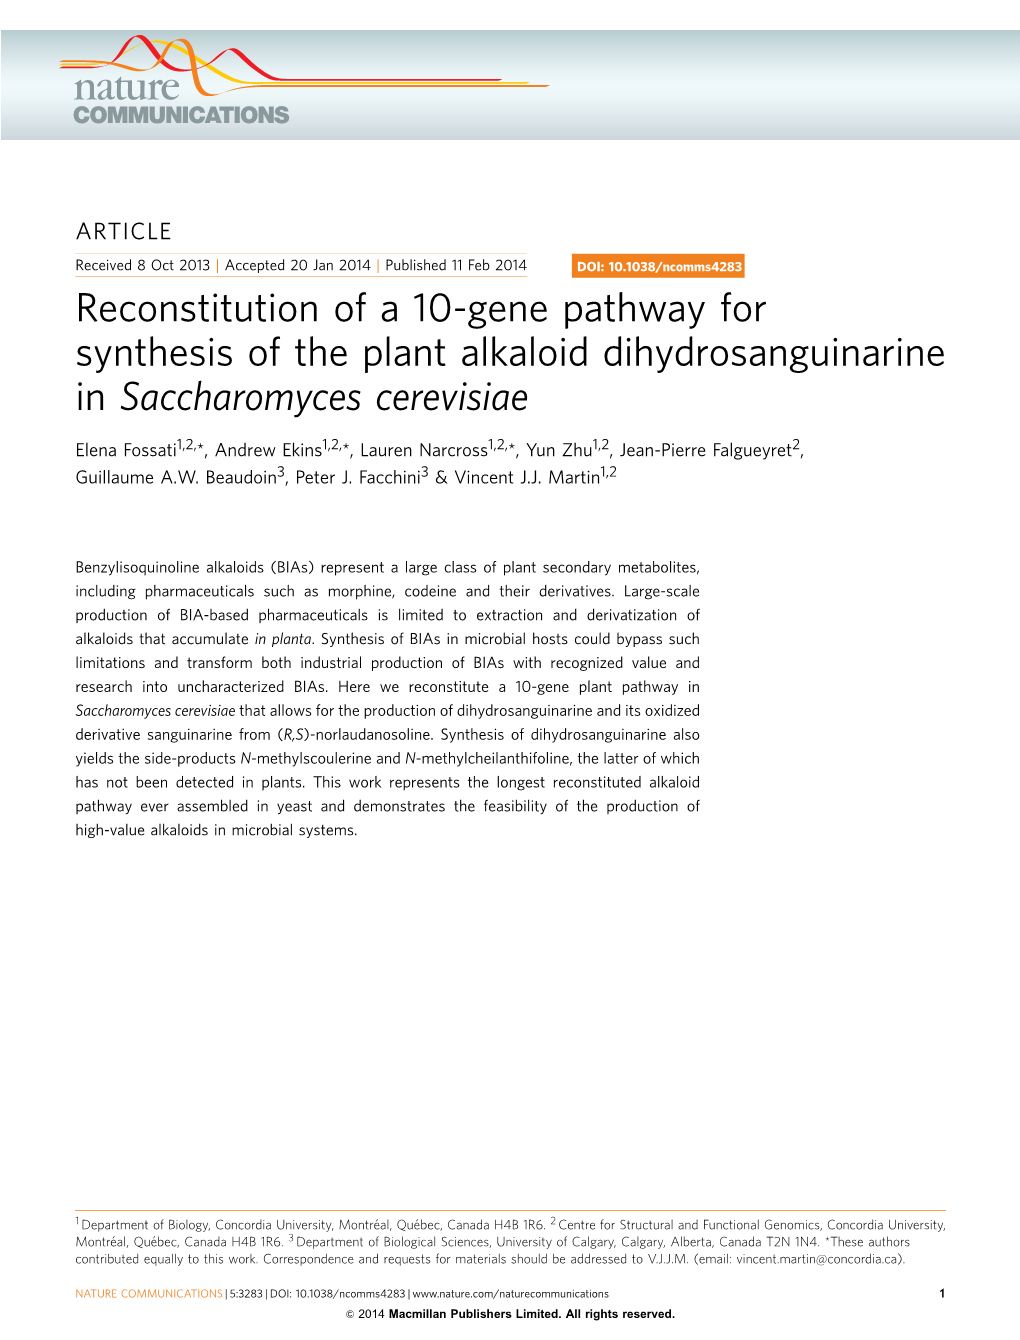 Reconstitution of a 10-Gene Pathway for Synthesis of the Plant Alkaloid Dihydrosanguinarine in Saccharomyces Cerevisiae